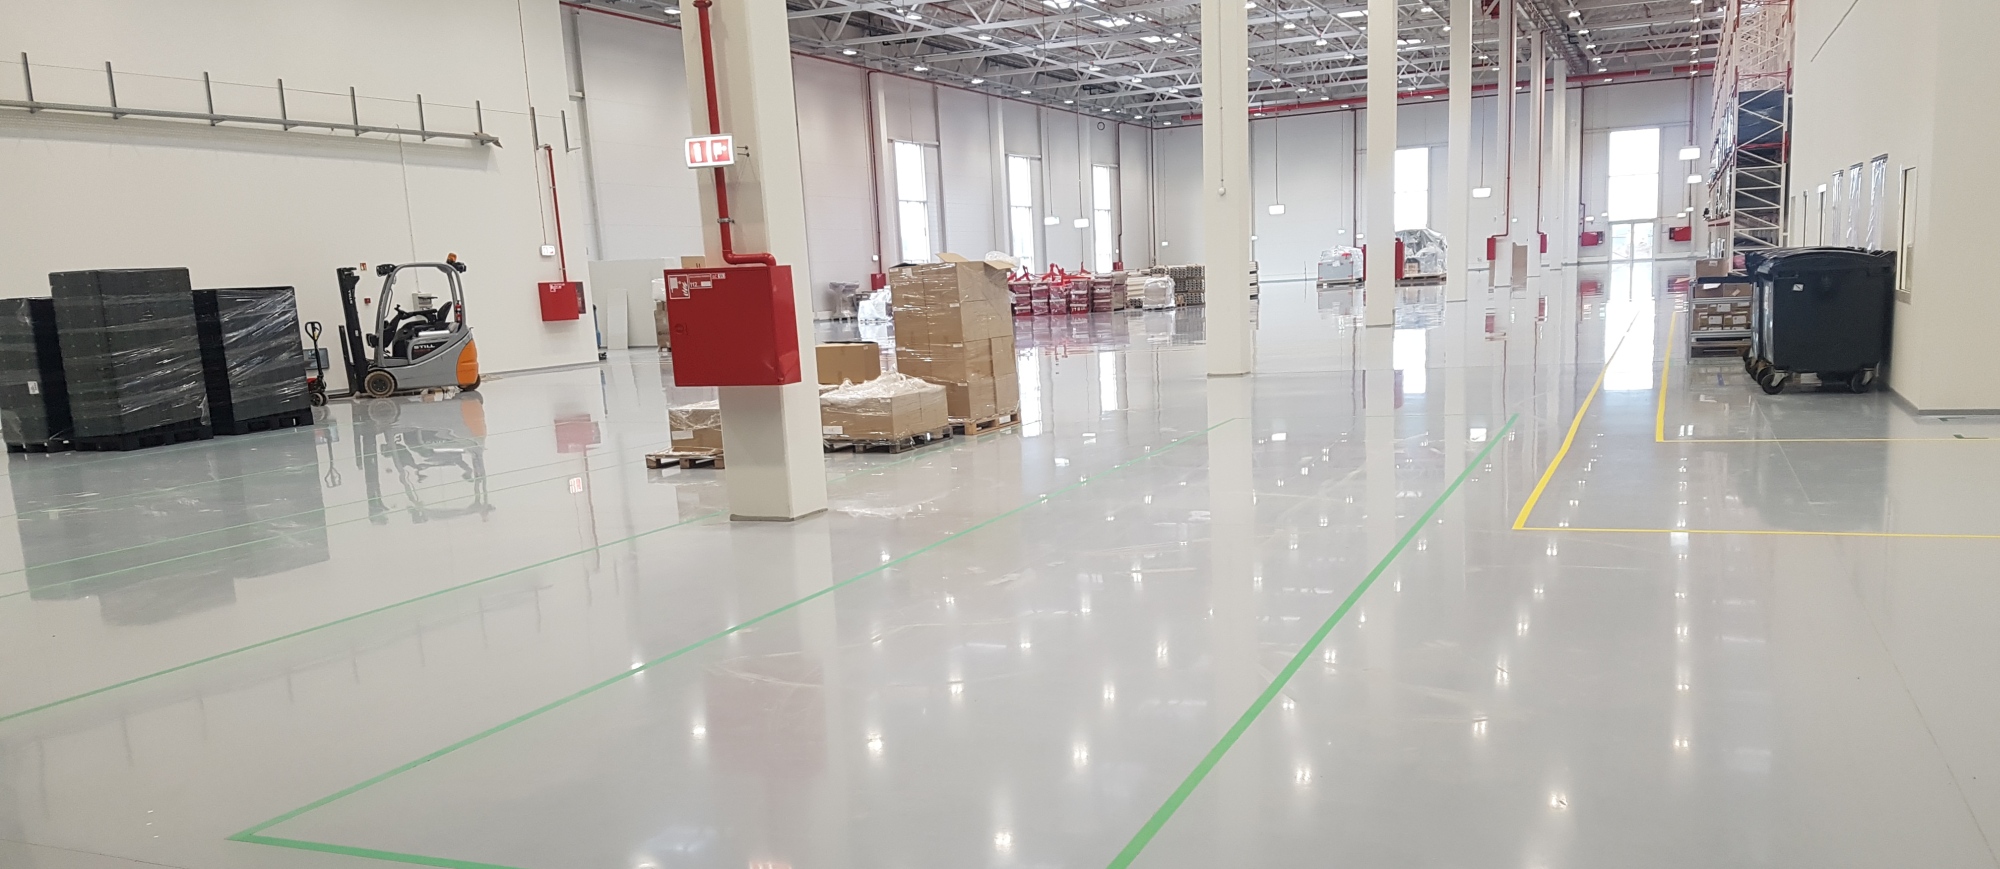 Proven and high-quality floor coatings